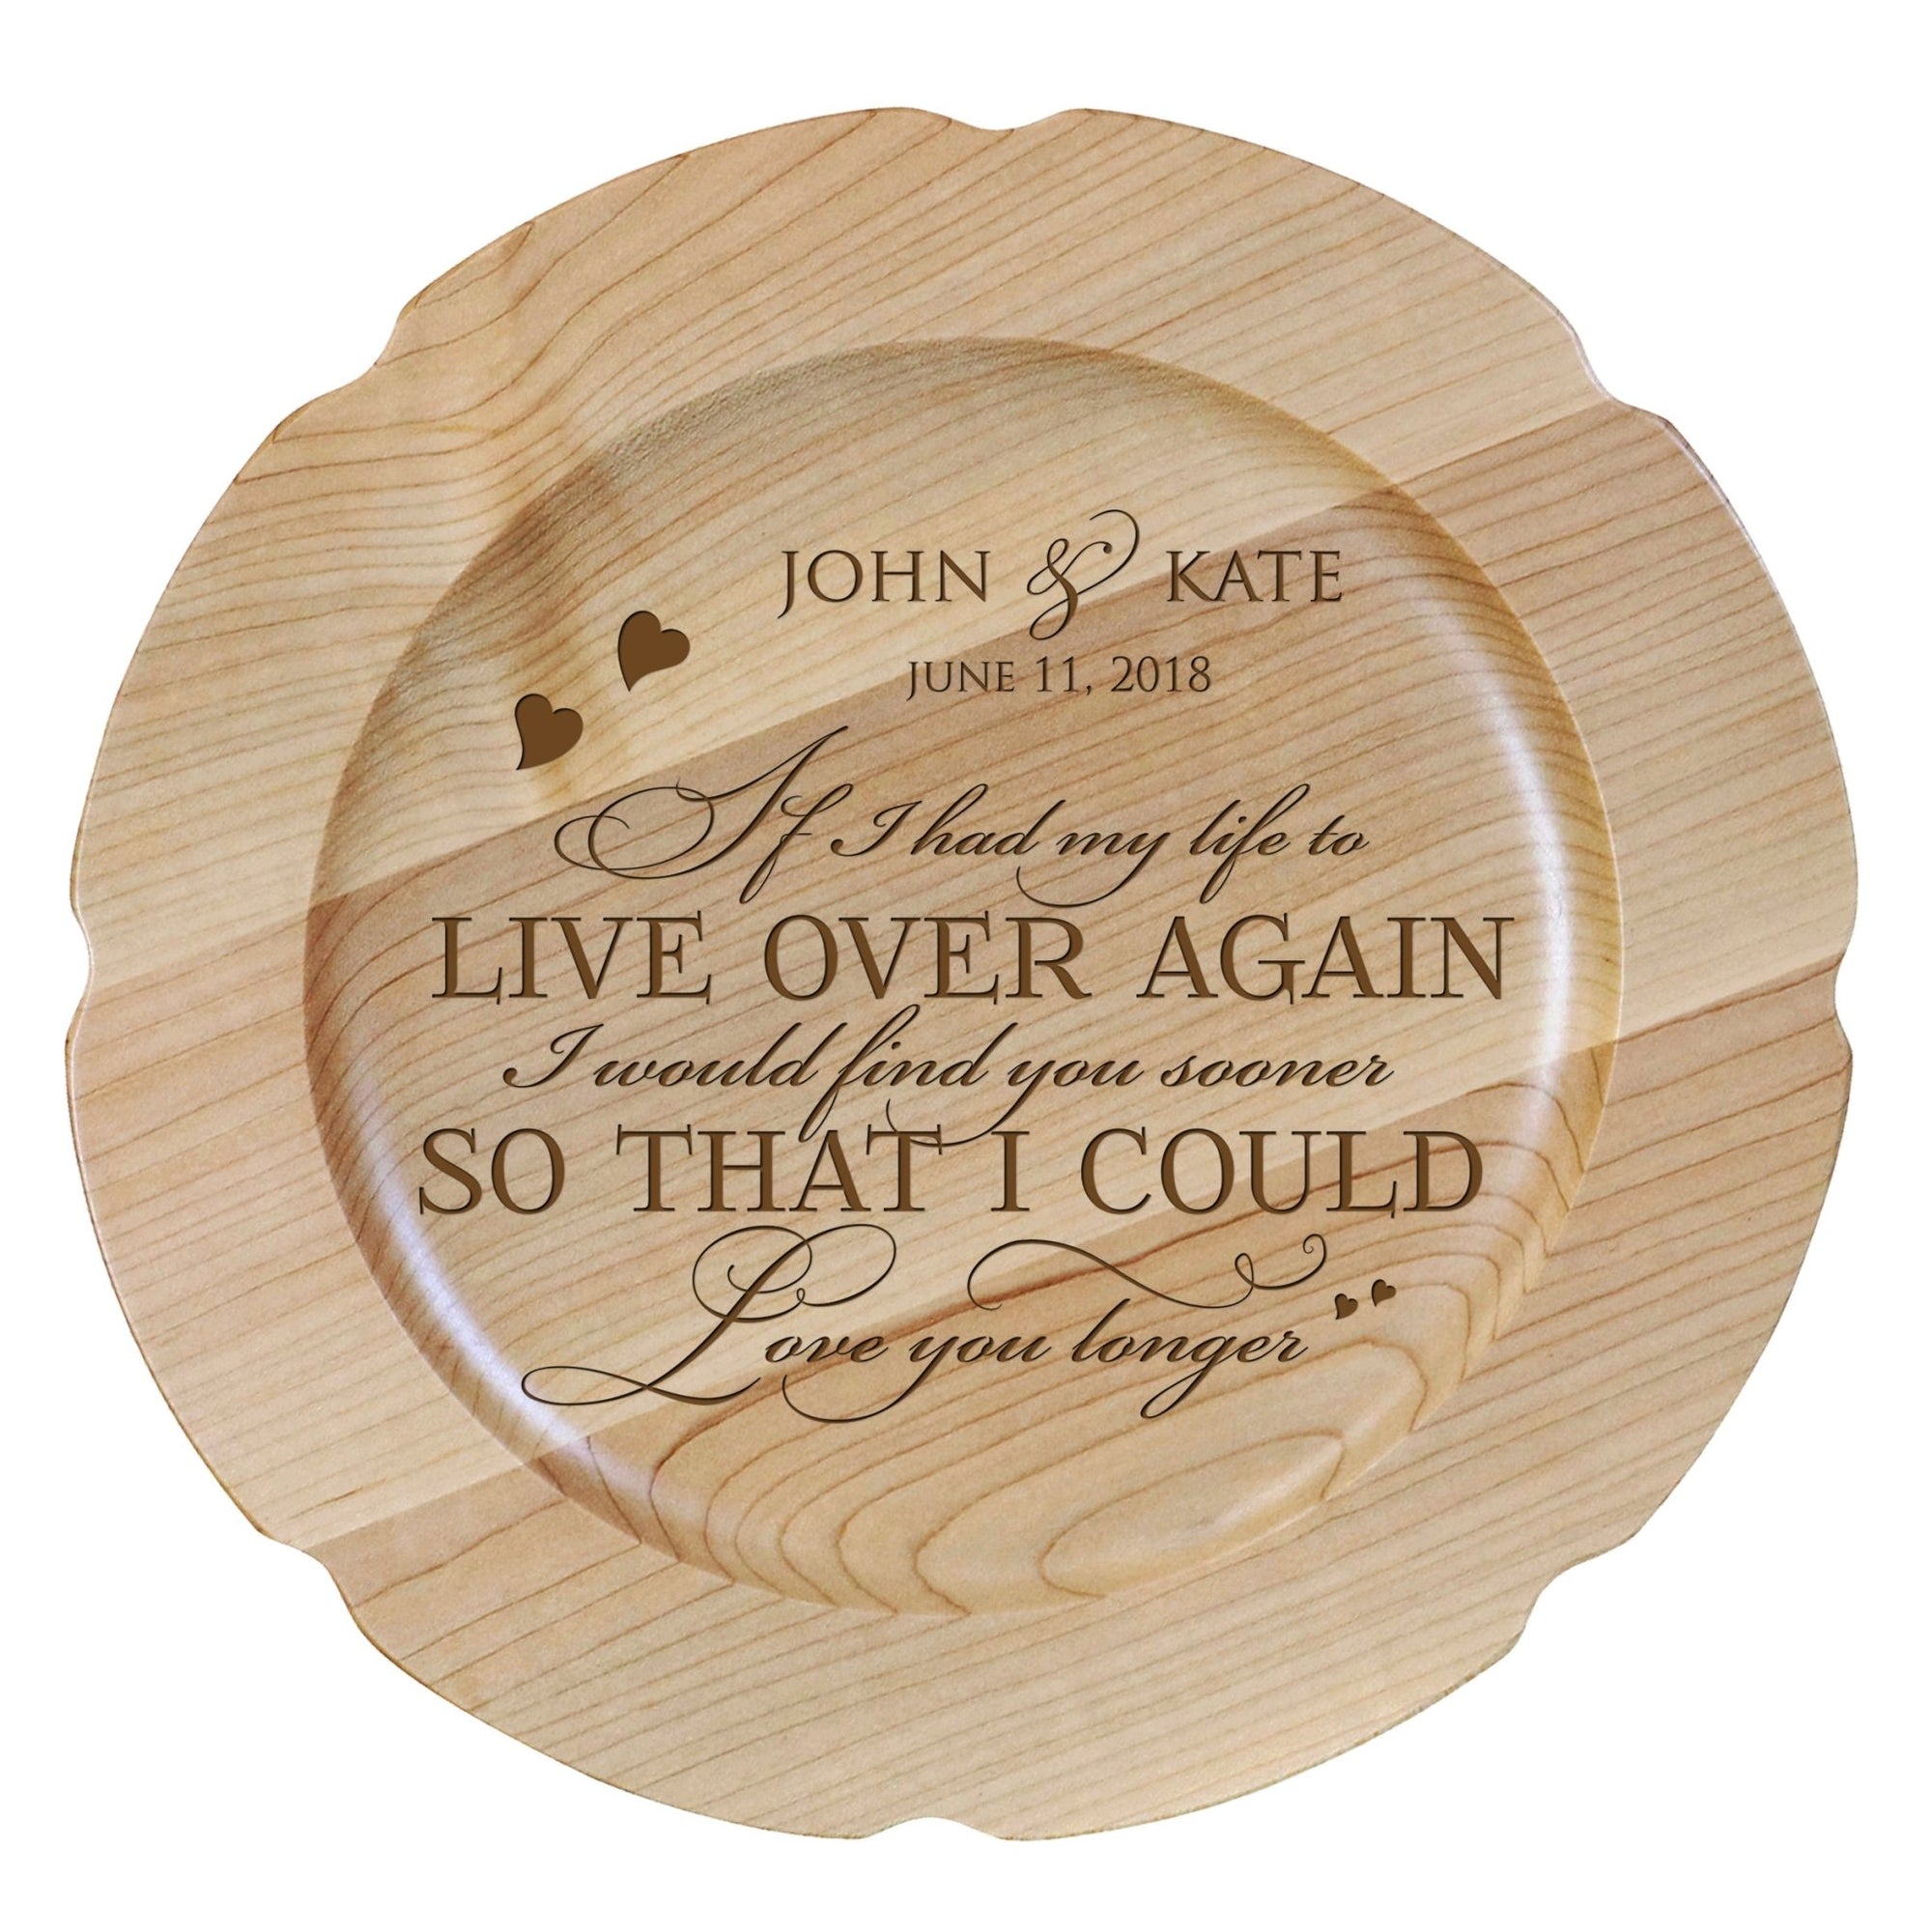 Personalized Inspirational Plates With Quotes - Live Over Again - LifeSong Milestones